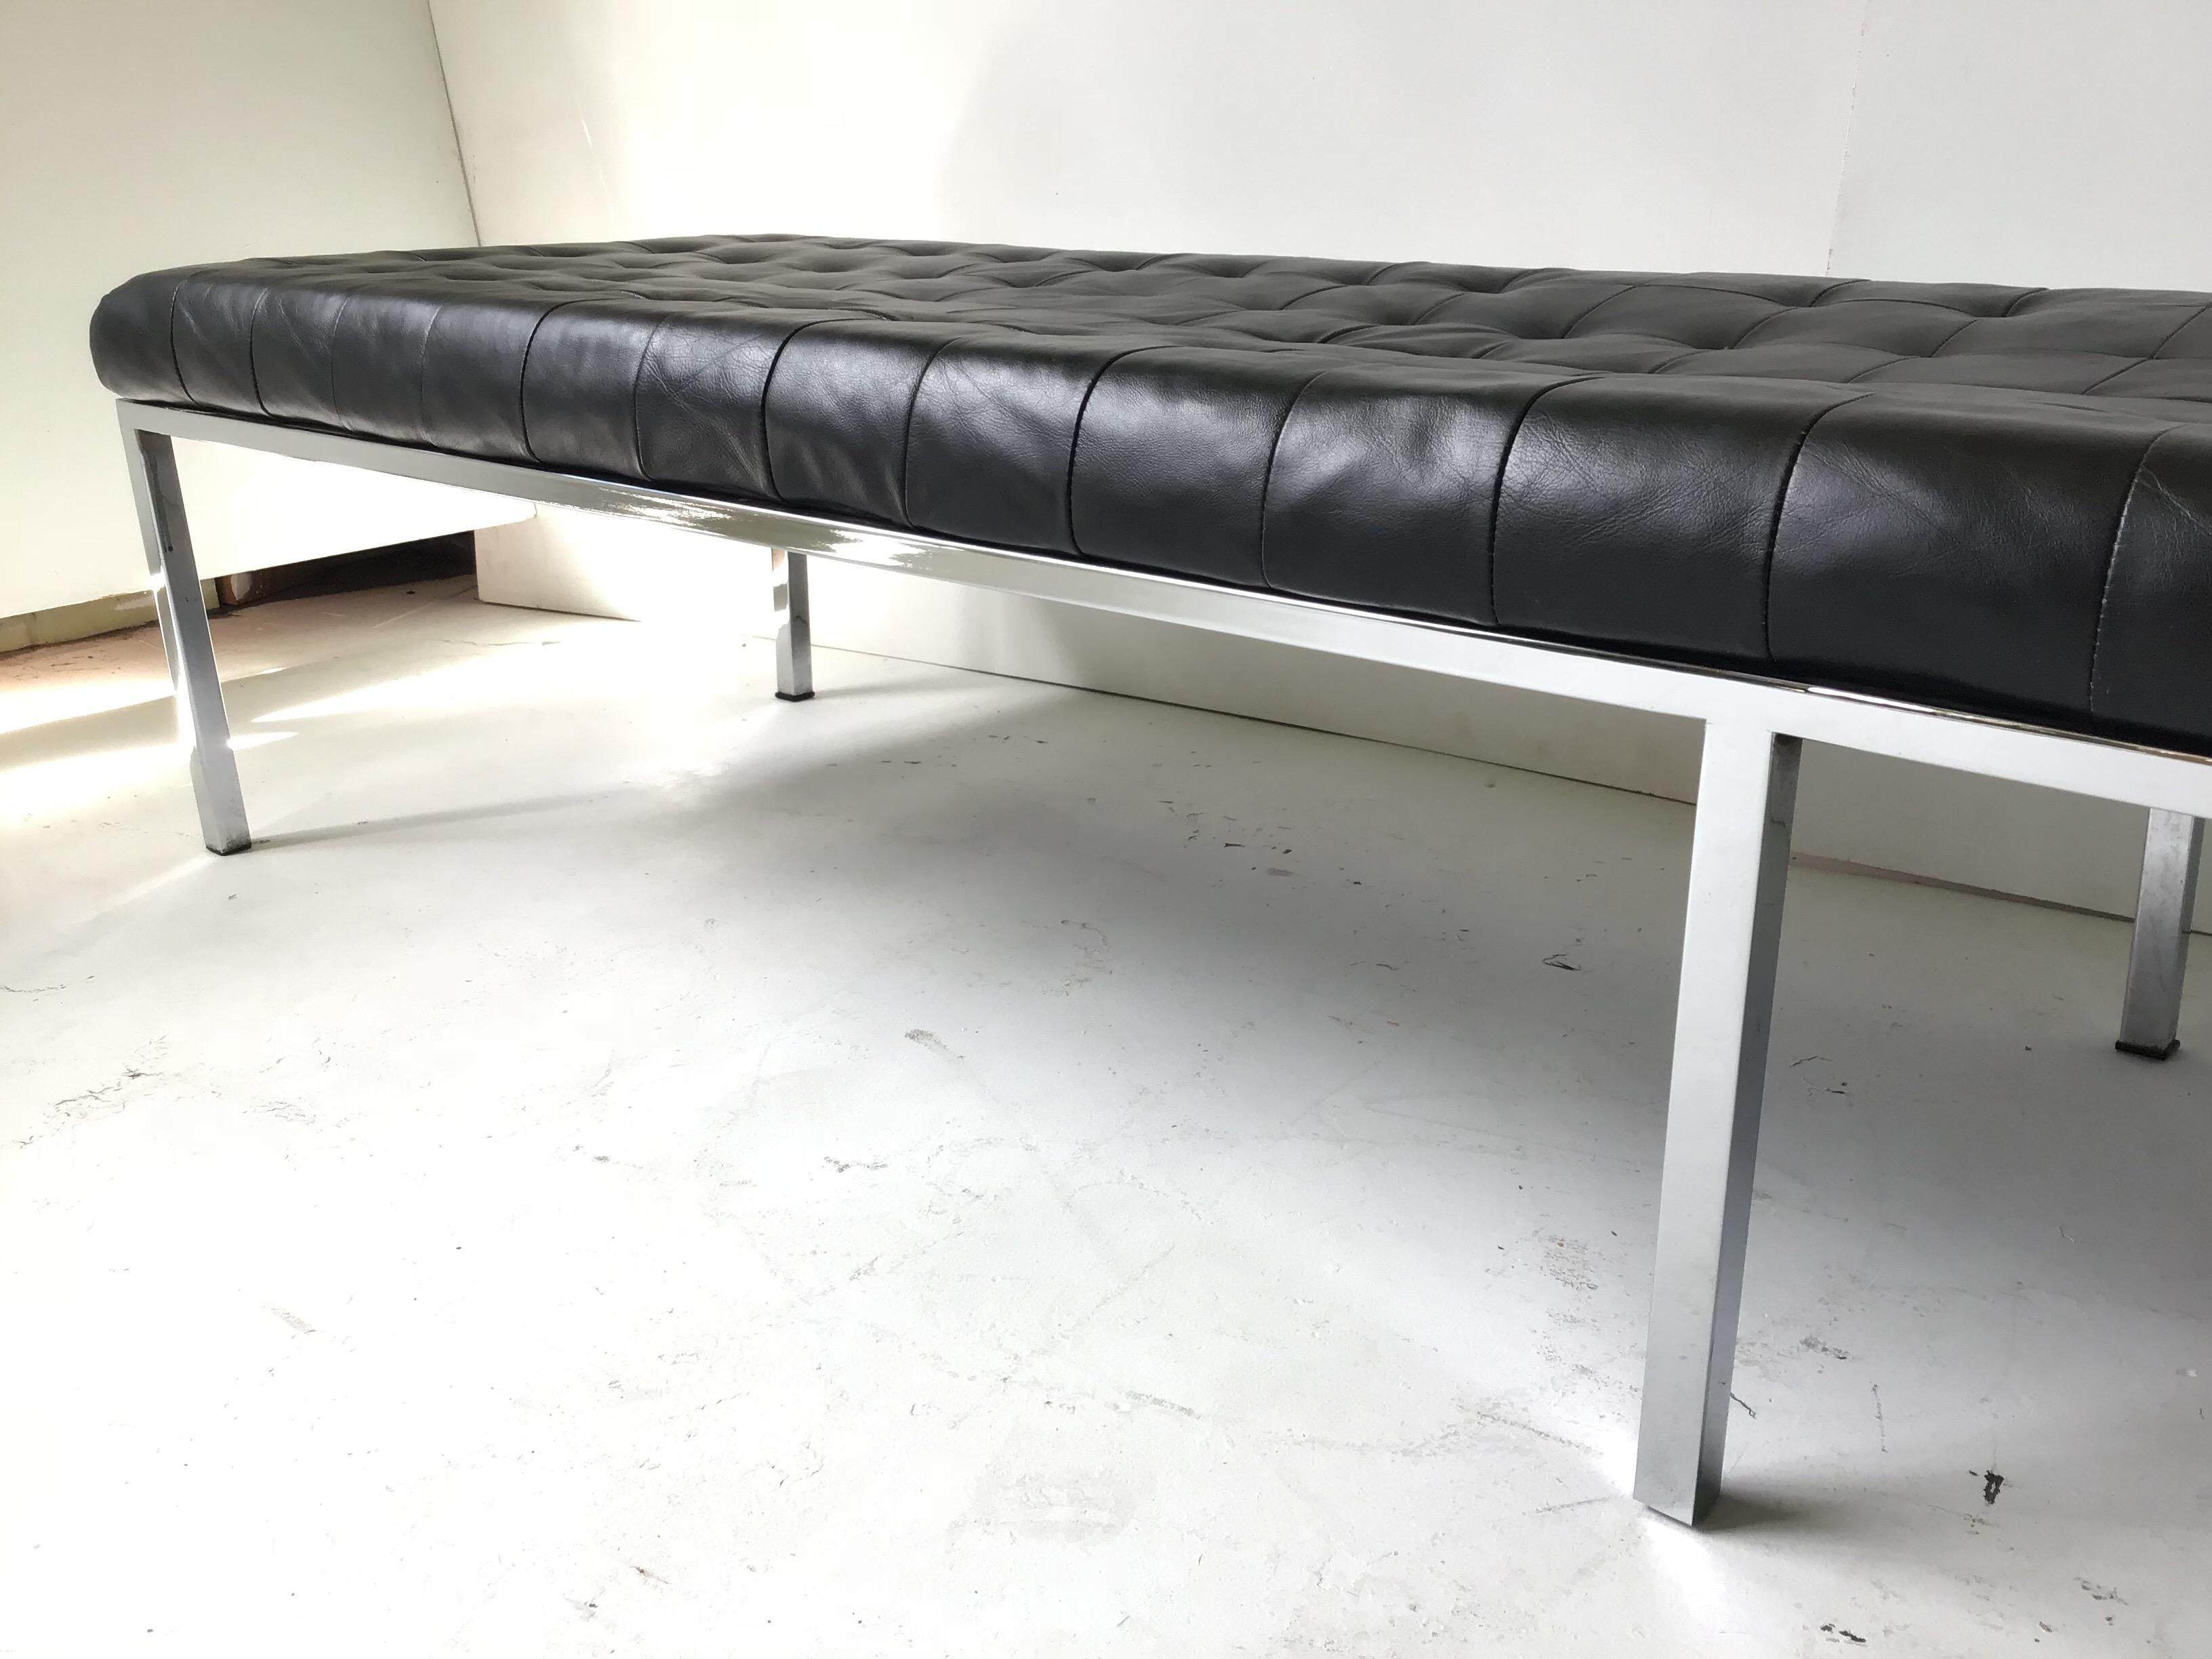 Leather Tufted Metropolitan Musem Bench In Excellent Condition For Sale In Tulsa, OK